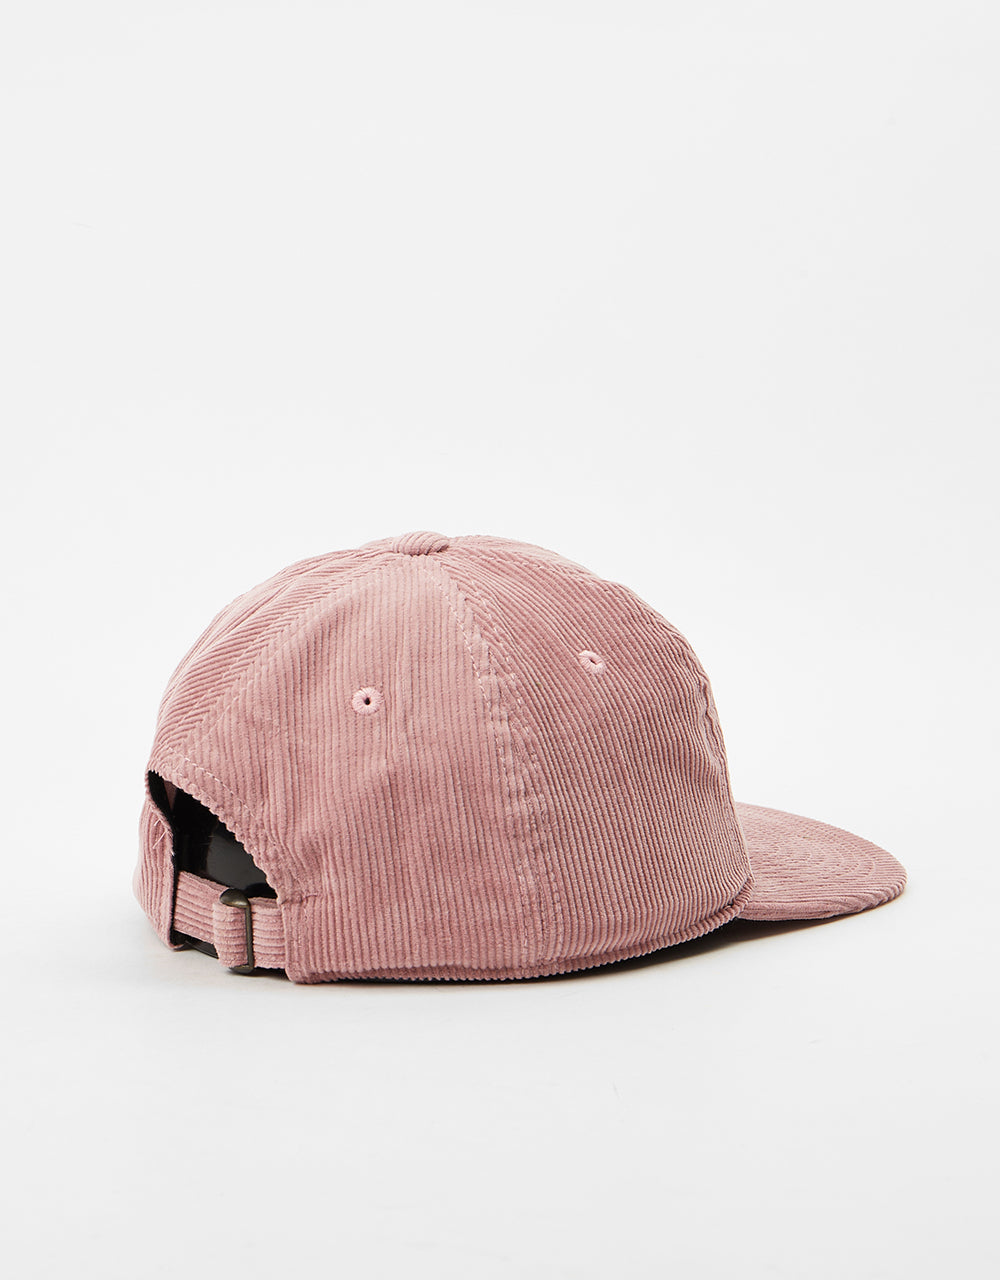 Route One Unstructured Cord 6 Panel Cap - Dusty Pink